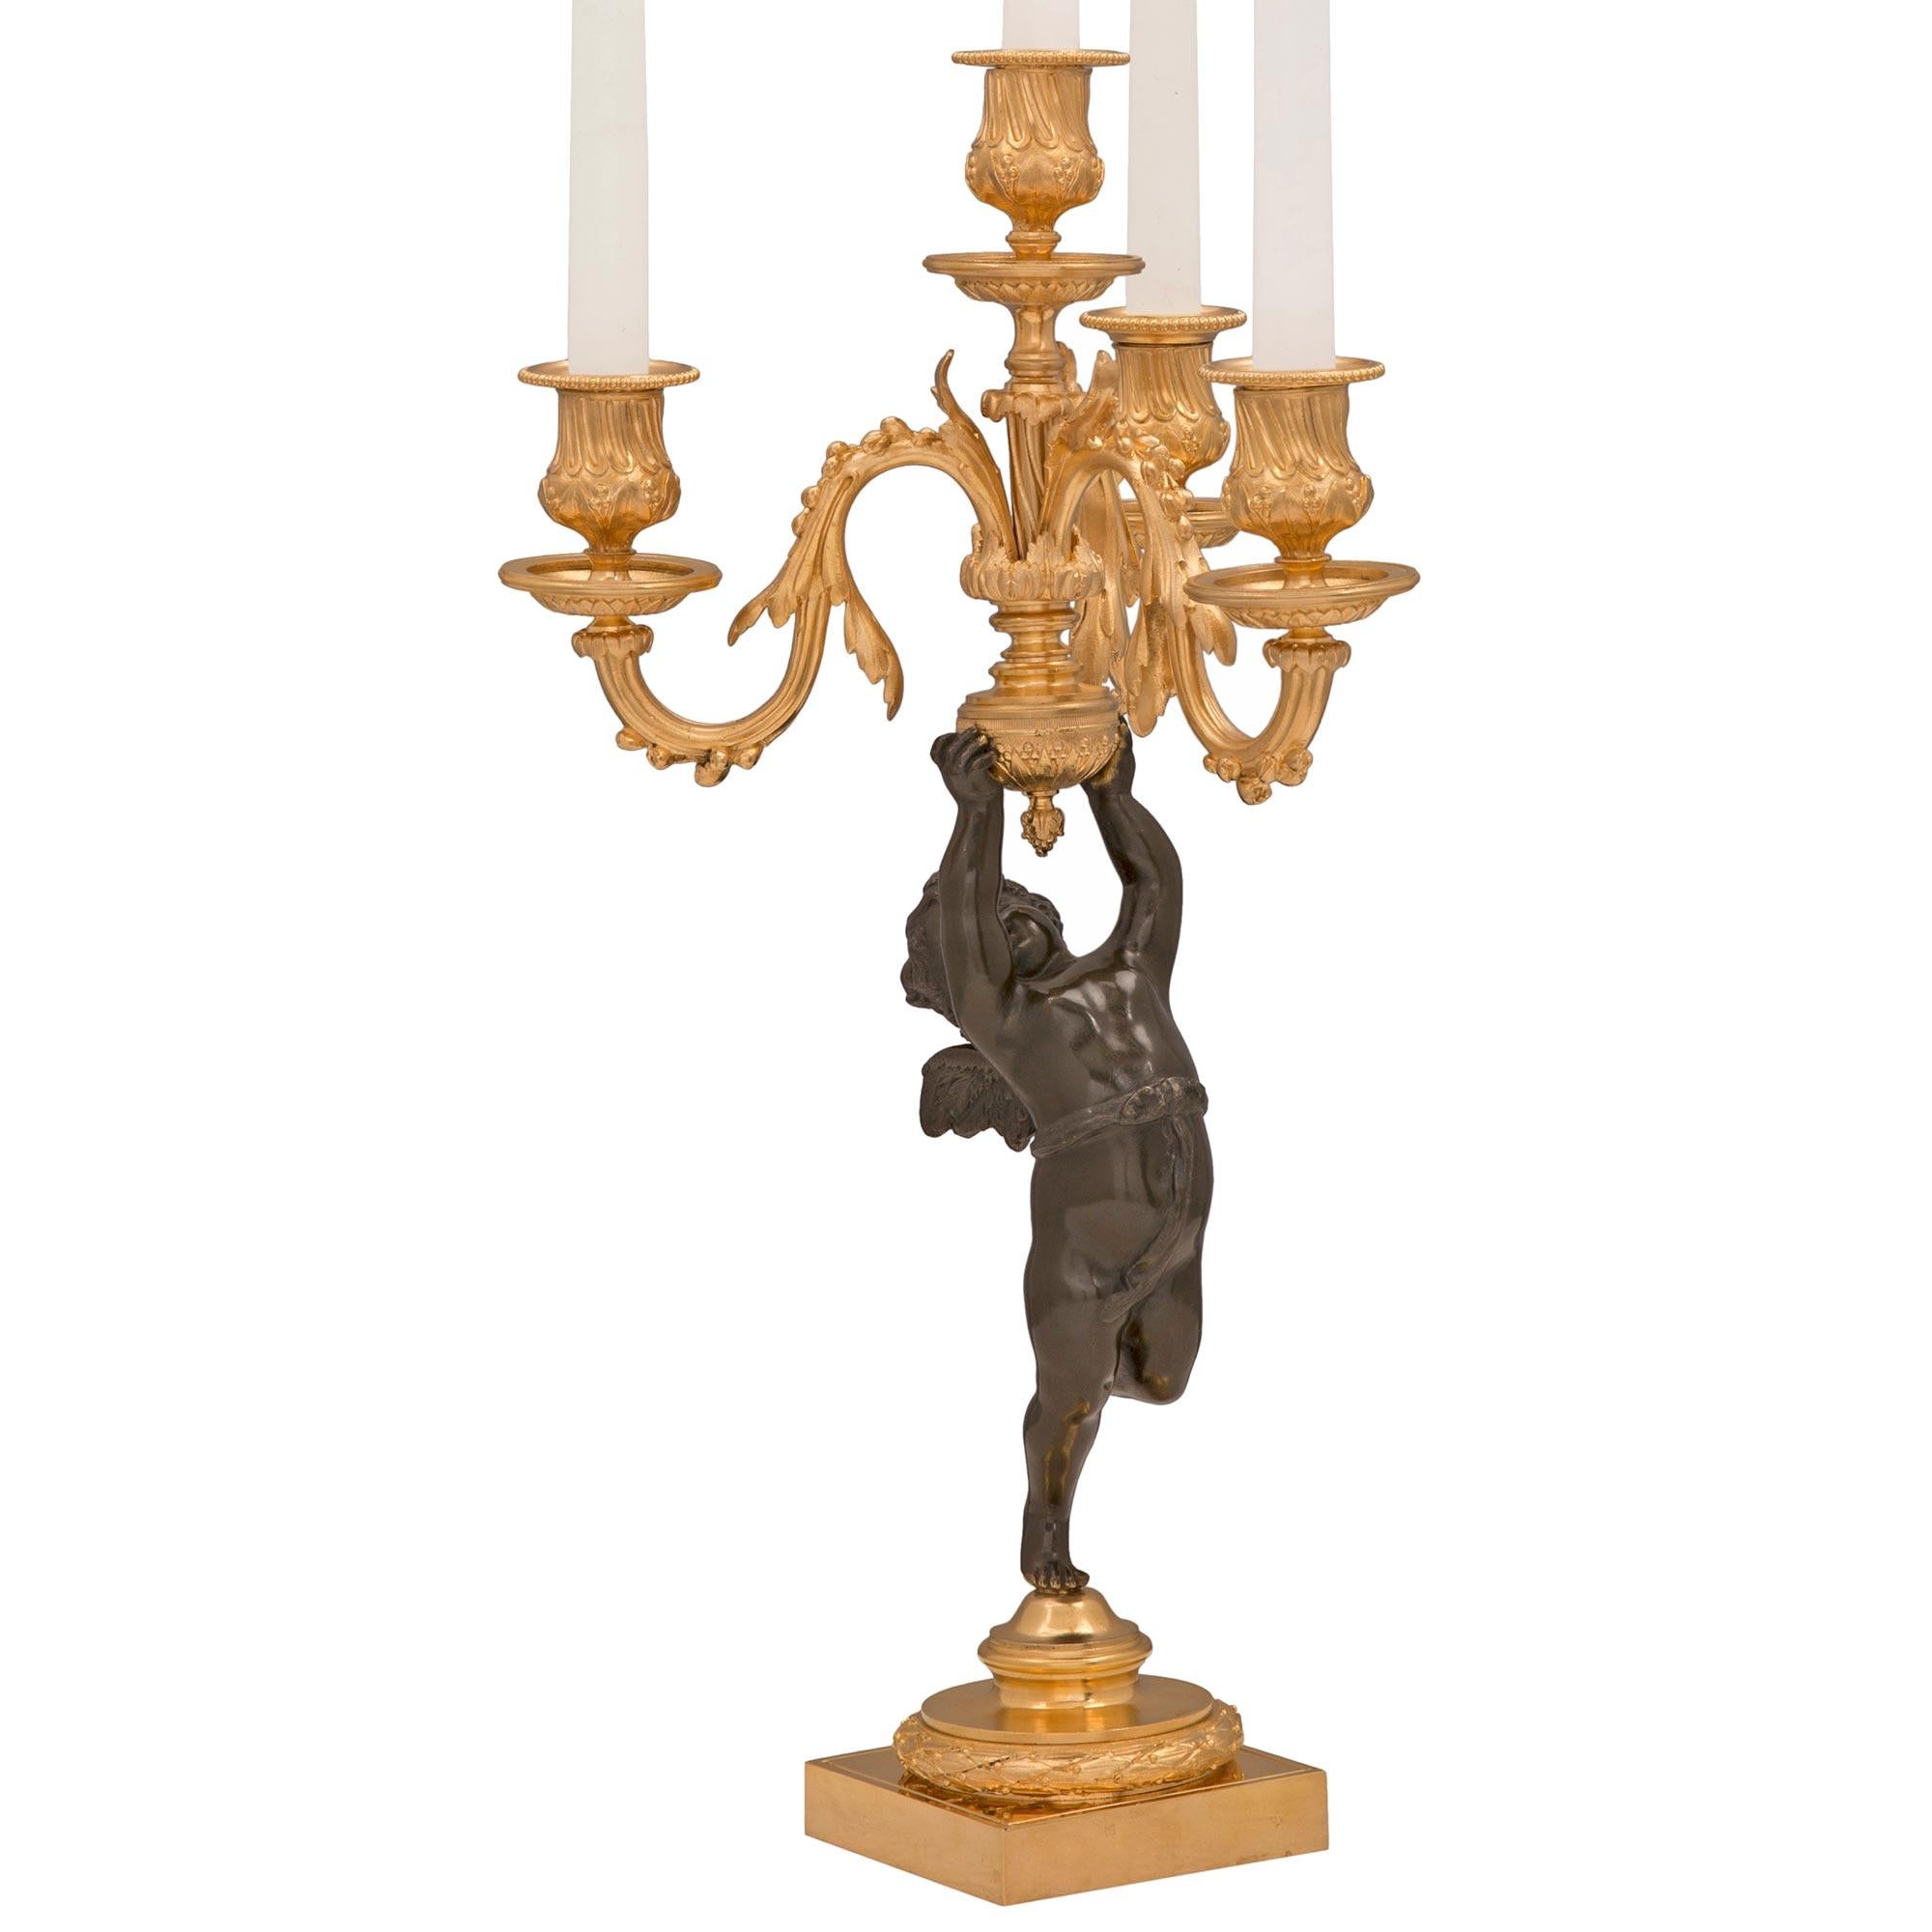 A charming pair of French 19th century Louis XVI st. patinated bronze and ormolu candelabras. Each four arm candelabra is raised by a square ormolu base with a fine wrap around berried laurel and mottled support where the charming winged cherubs at